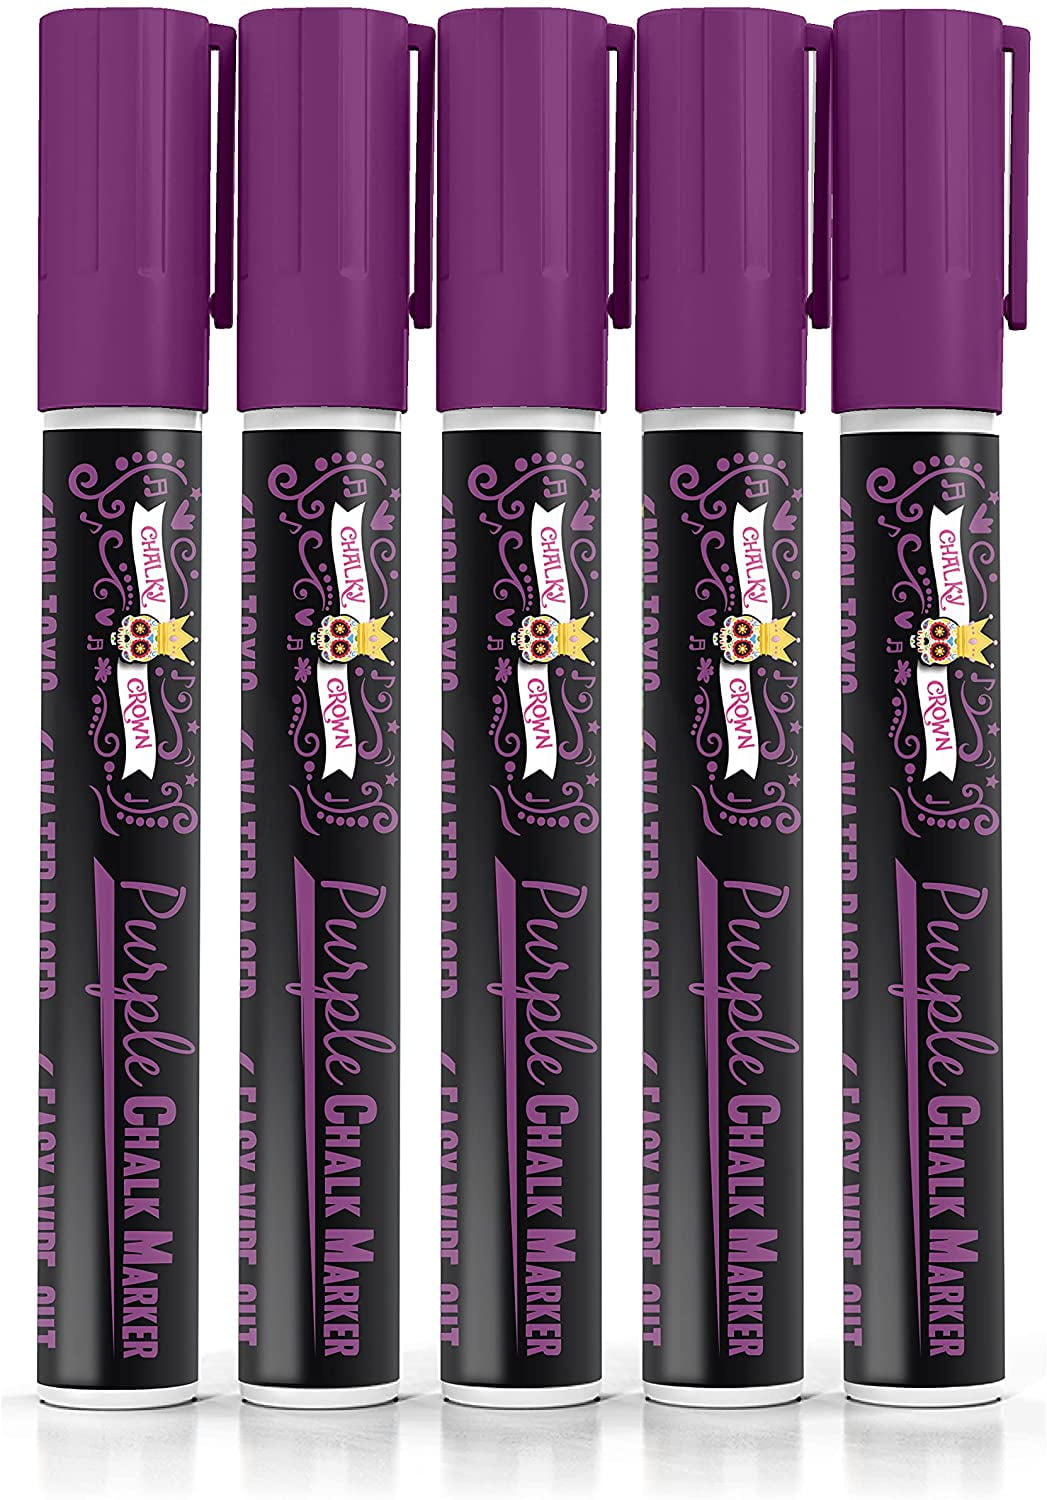 Cestari Purple Liquid Chalk Pen - 2mm Skinny Tip for Writing and Drawing on  Glass, Mirrors, Stainless Steel, Ceramic, Vinyl Chalkboards, and Crafts 